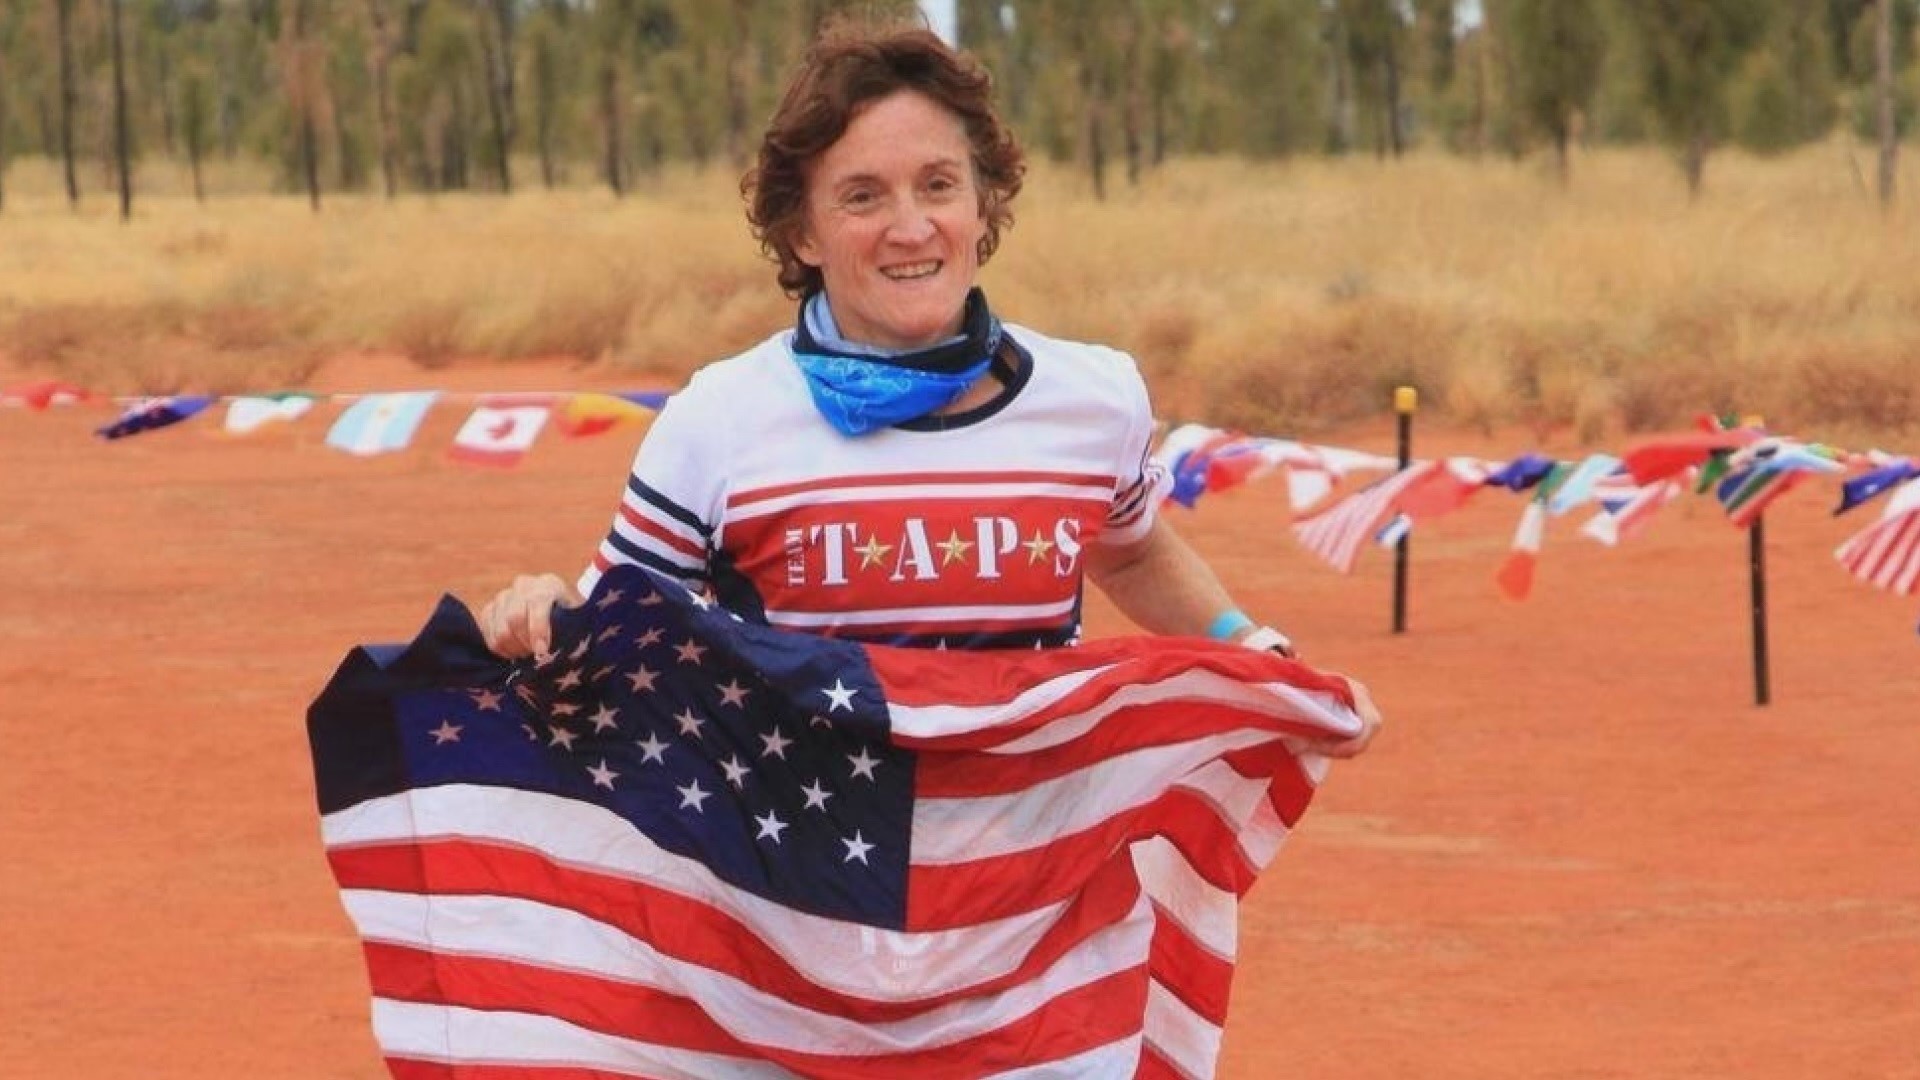 Linda Ambard of Colorado Springs has completed a marathon on every continent. She runs with an American flag to remember her husband Phil.